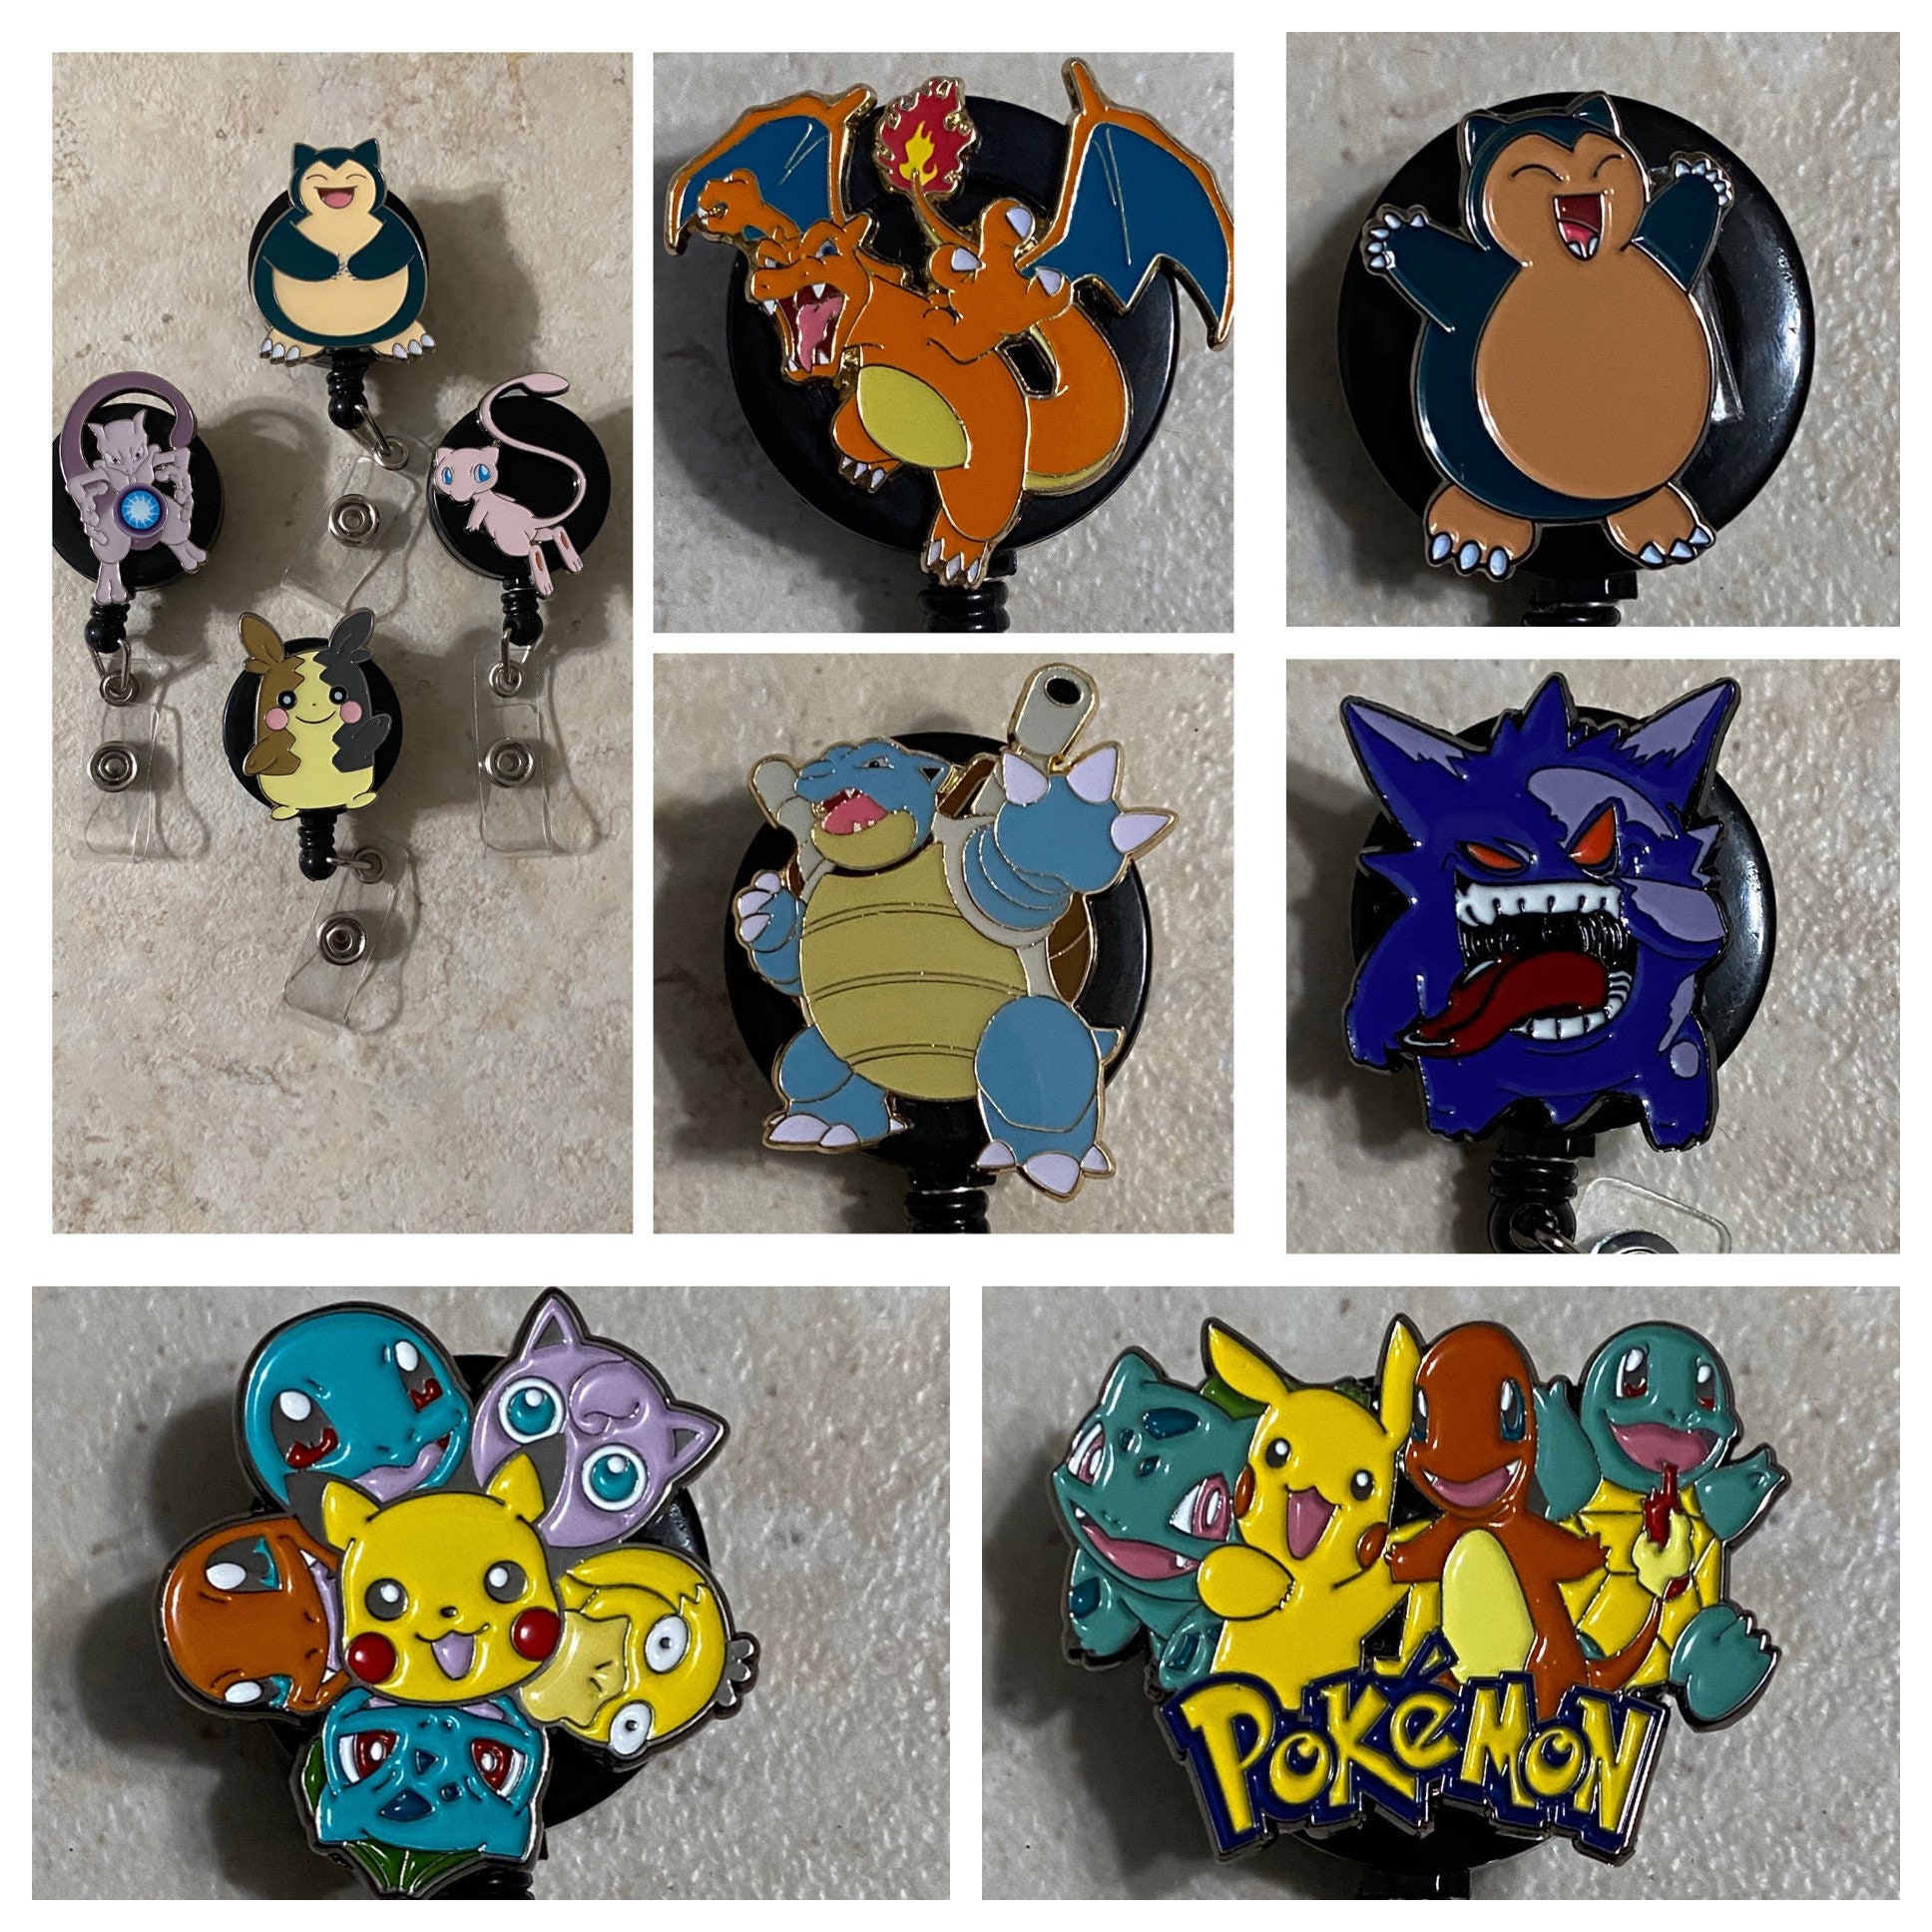 Pokemon Snorlax Badge Reel Id Holder for Sale in San Leandro, CA - OfferUp